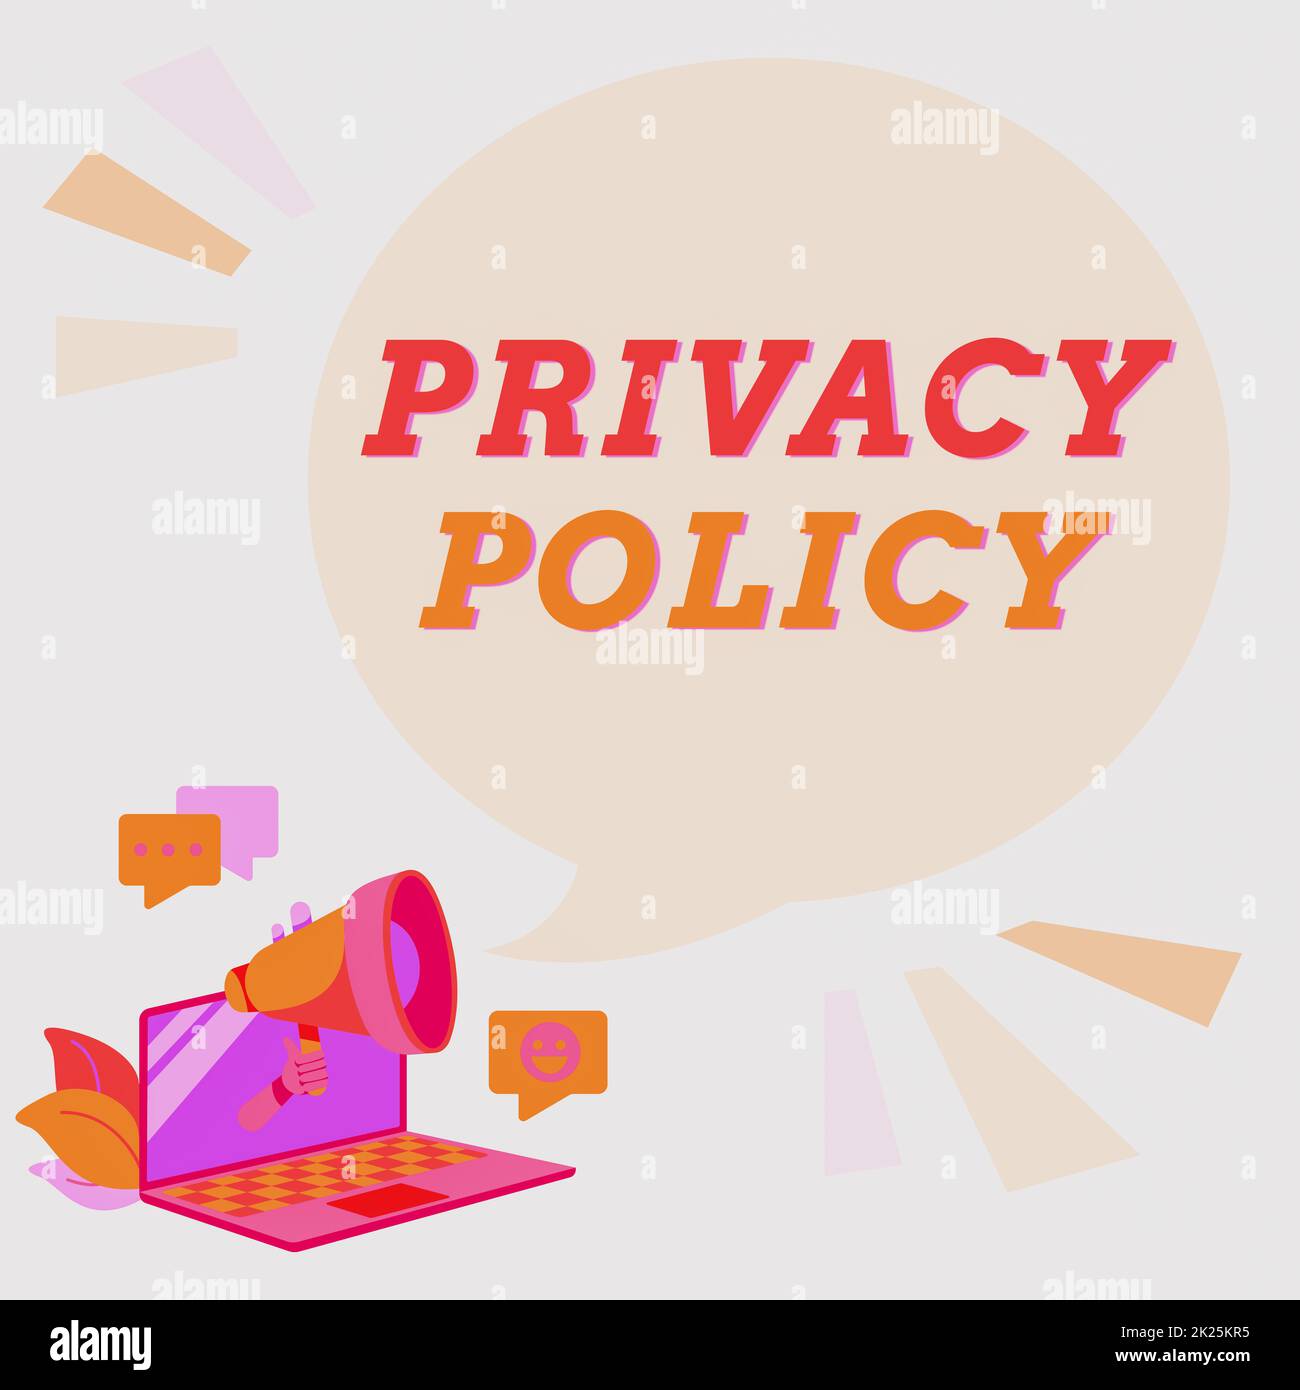 Text caption presenting Privacy Policy. Business showcase Document that explains how an organization handles clients Laptop Drawing Sharing Comments And Reactions At Chat Cloud Over Megaphone. Stock Photo